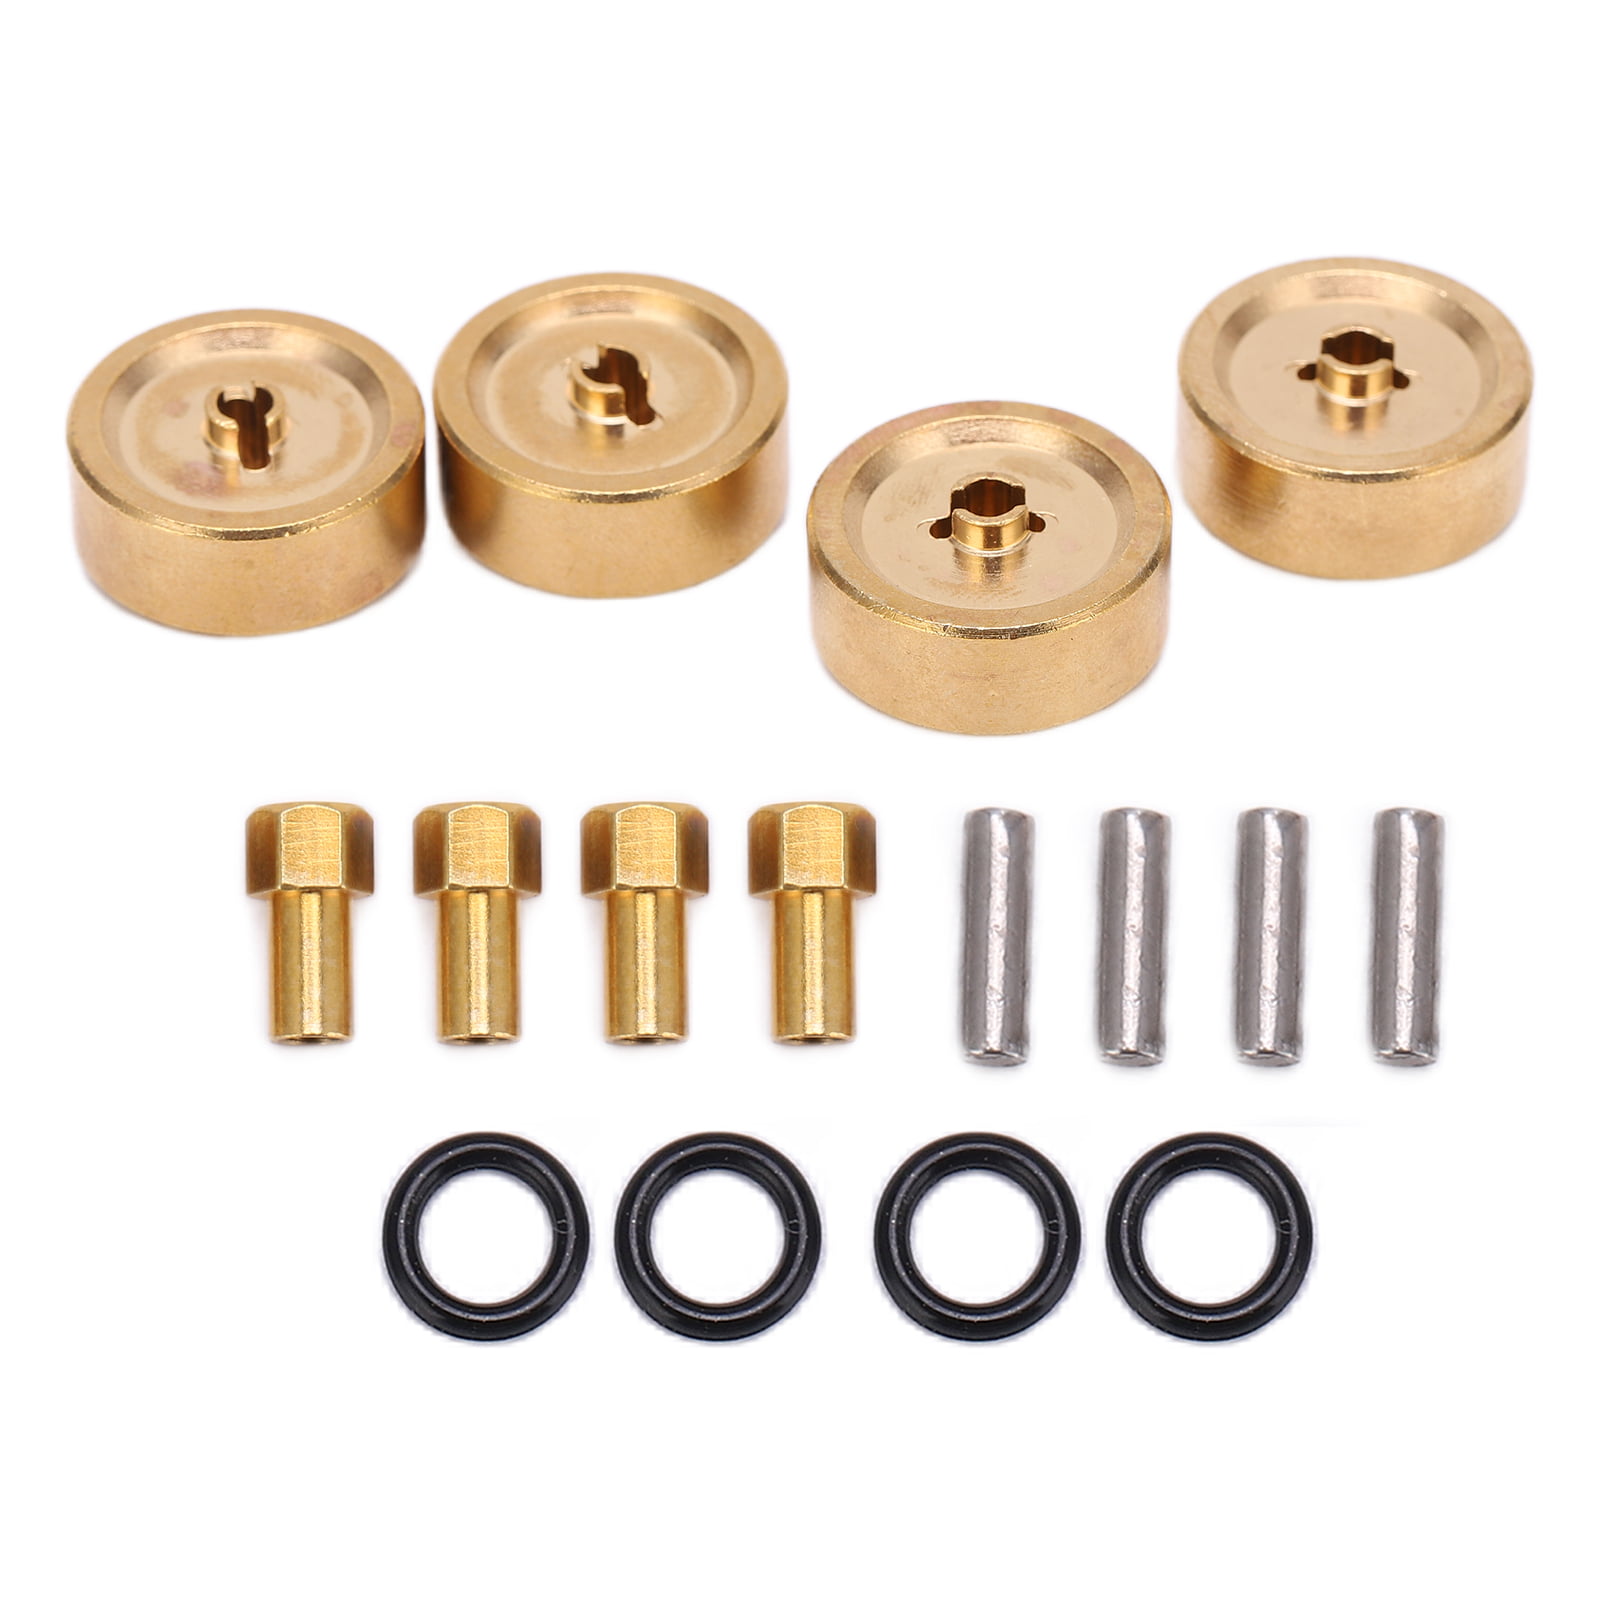 2PCS RC Wheel Weight Block Counterweight Brass Internal Beadlock Spare Parts Fit for Axial Wraith 90018/90020/90031/90045/90056 RC Model Car 